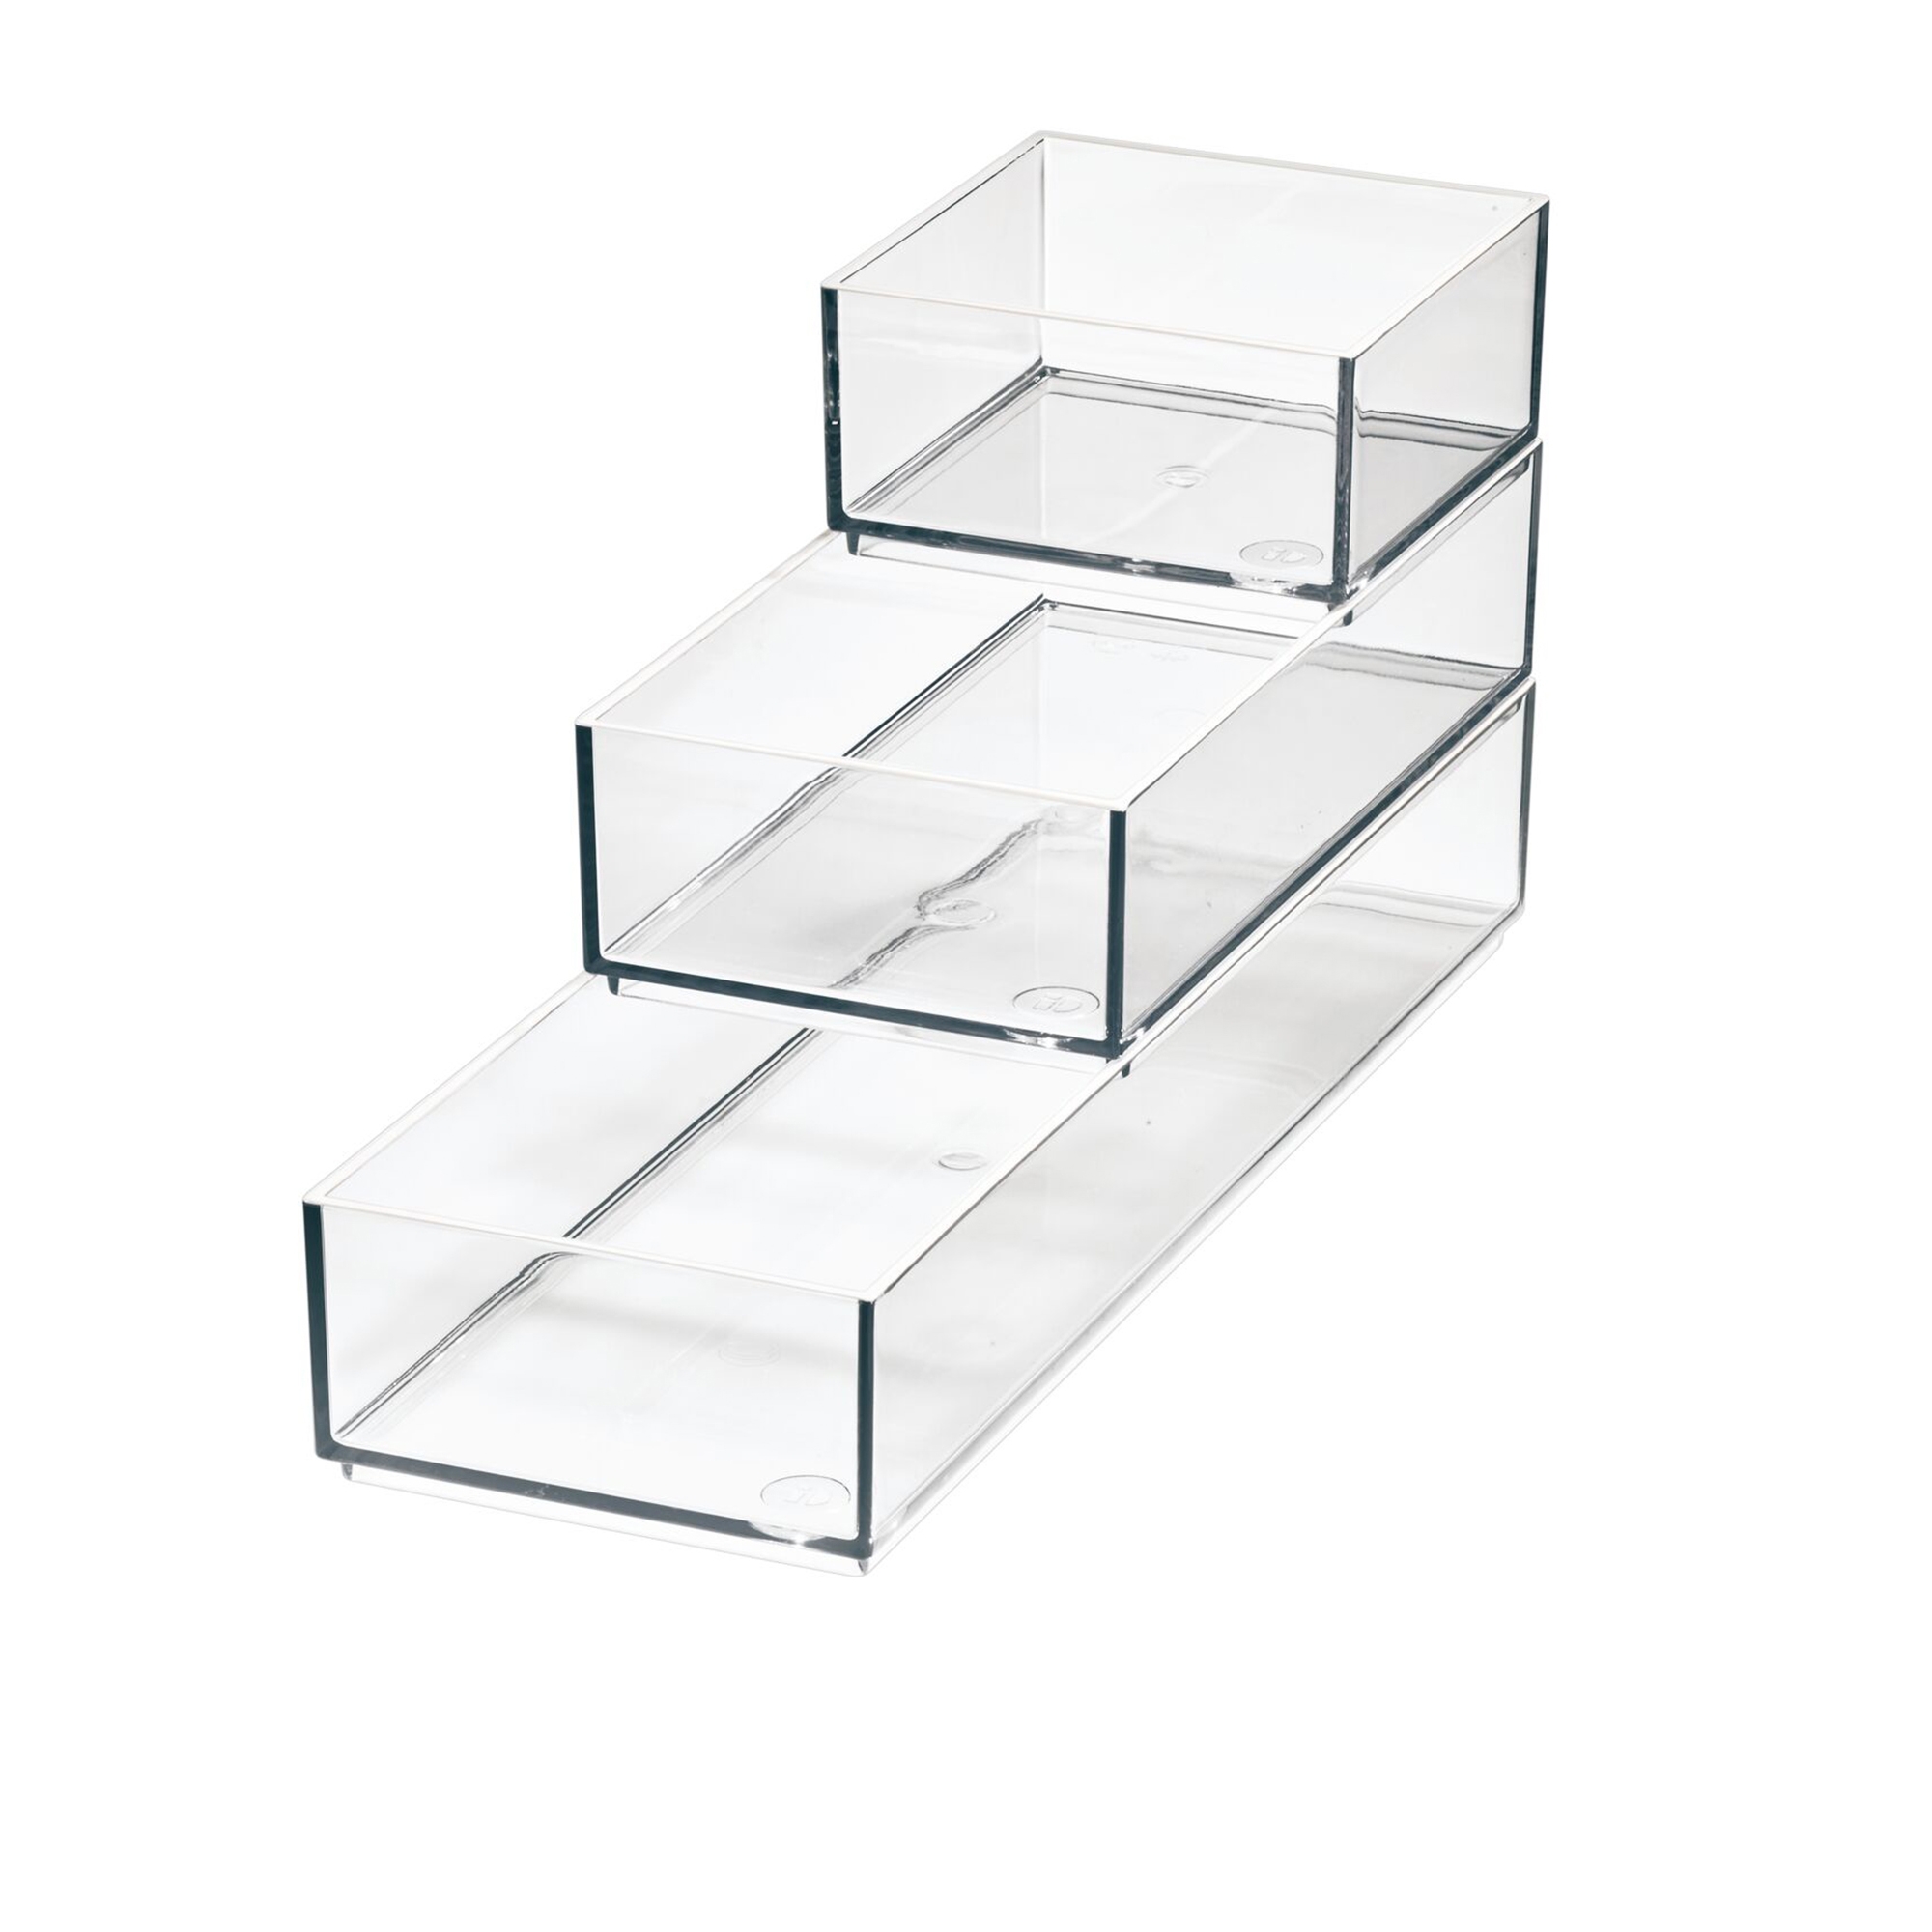 Sarah Tanno by iDesign Stak and Slide Cosmetic Organizer Clear Image 1